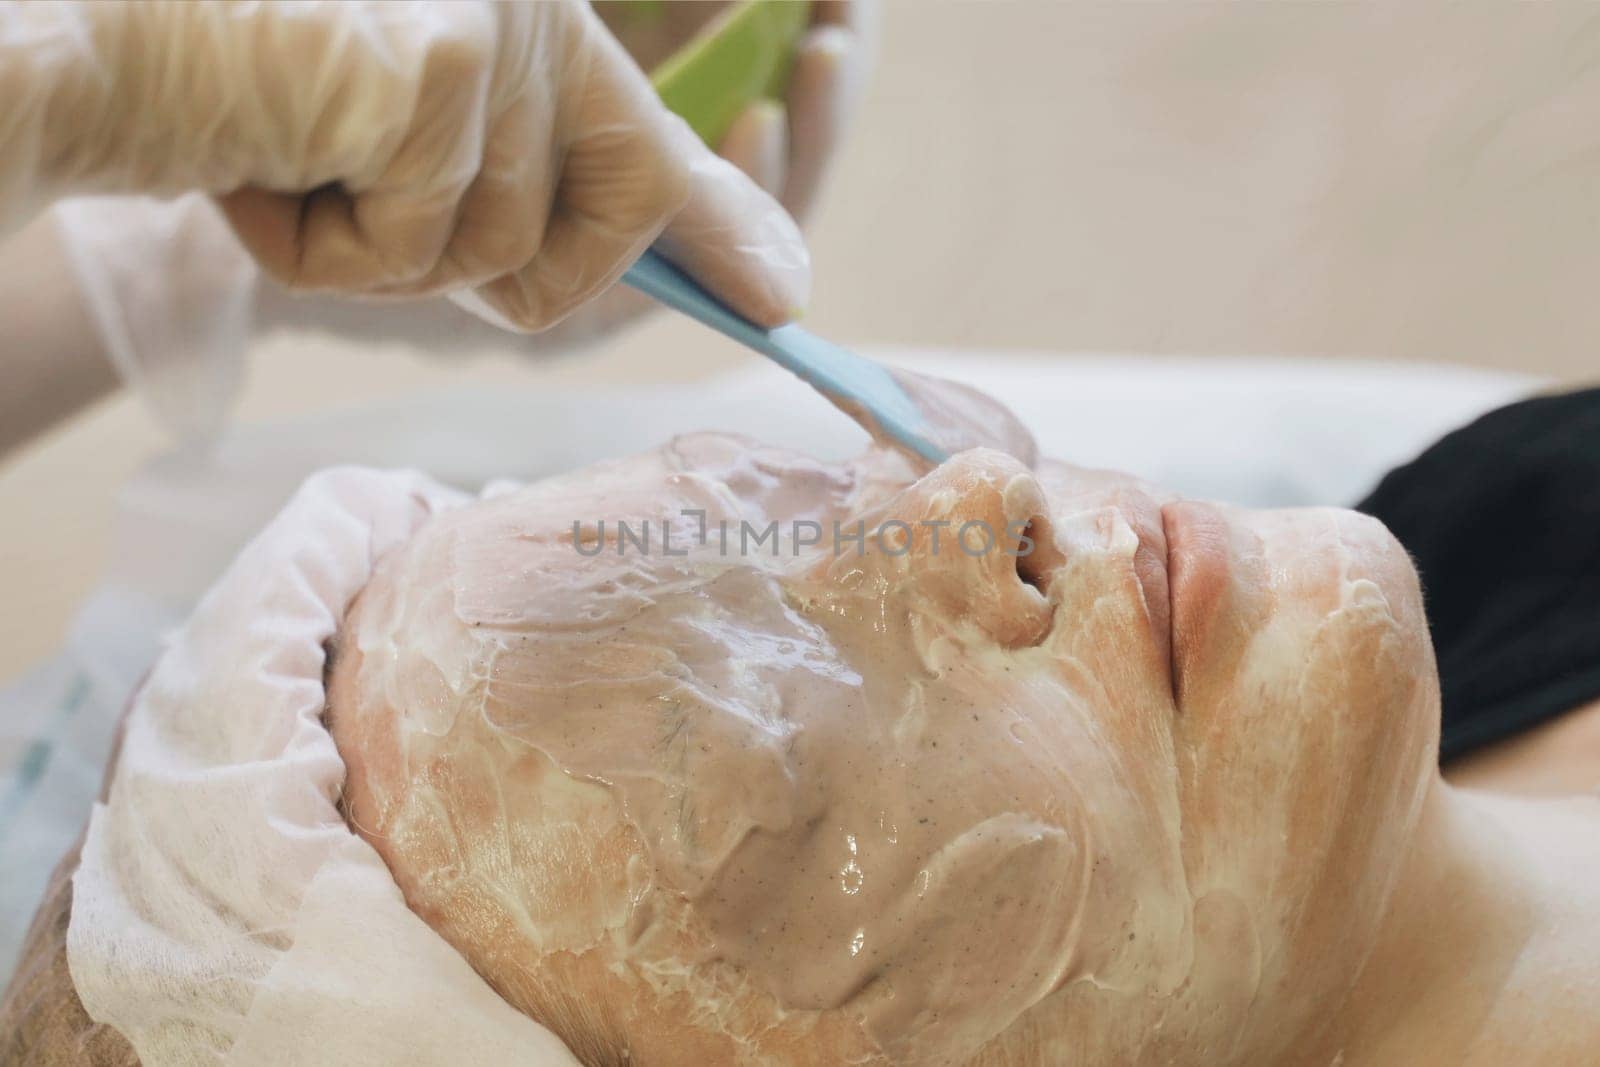 A woman getting a facial mask applied on her face at a beauty salon.